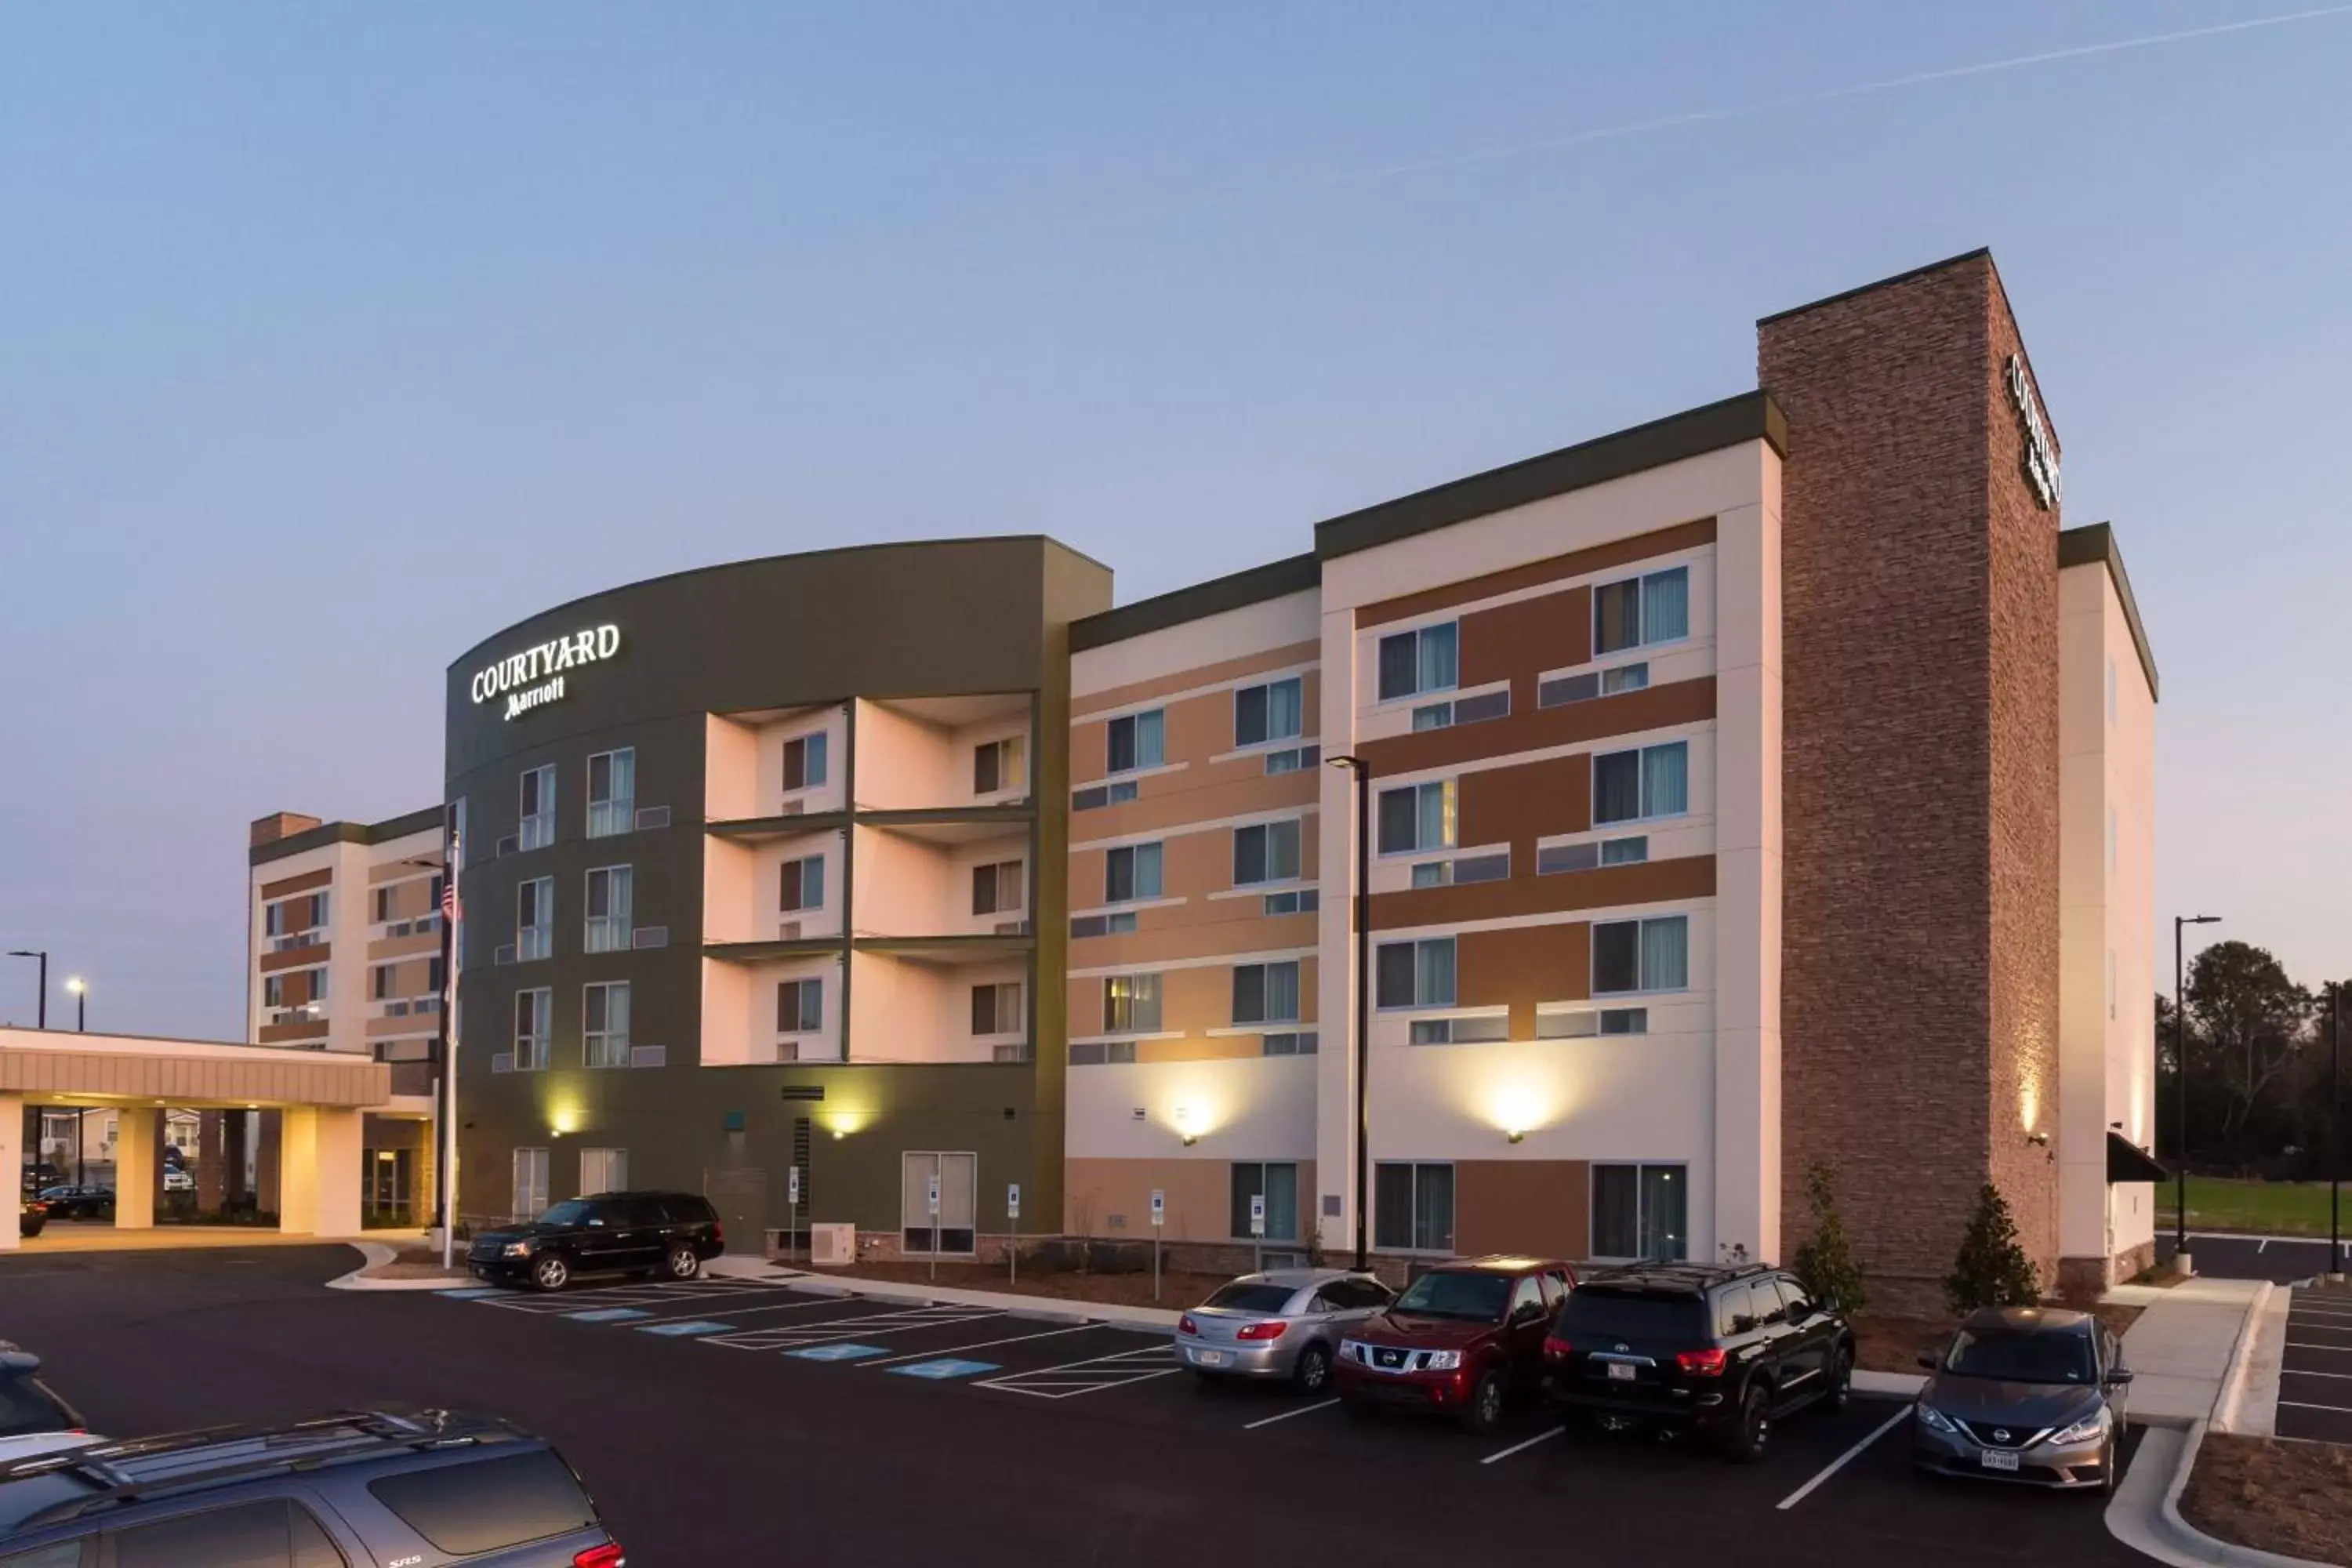 Property Building in Courtyard by Marriott Fayetteville Fort Bragg/Spring Lake